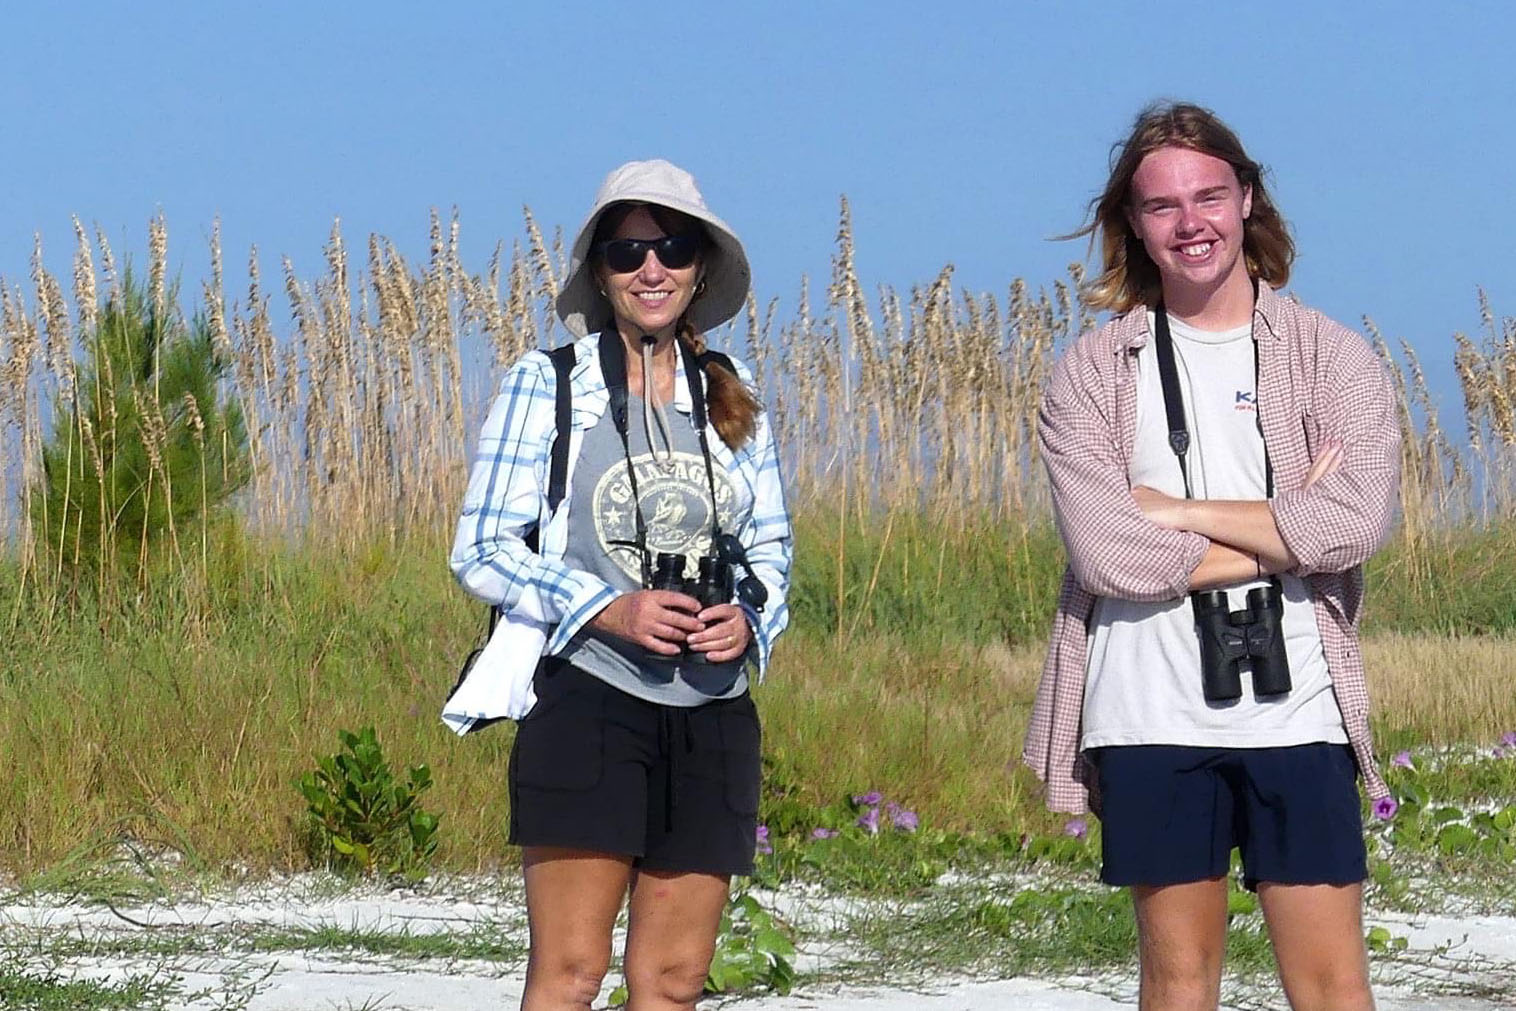 Professor and student wearing binoculars while out in the field in sandy beach area